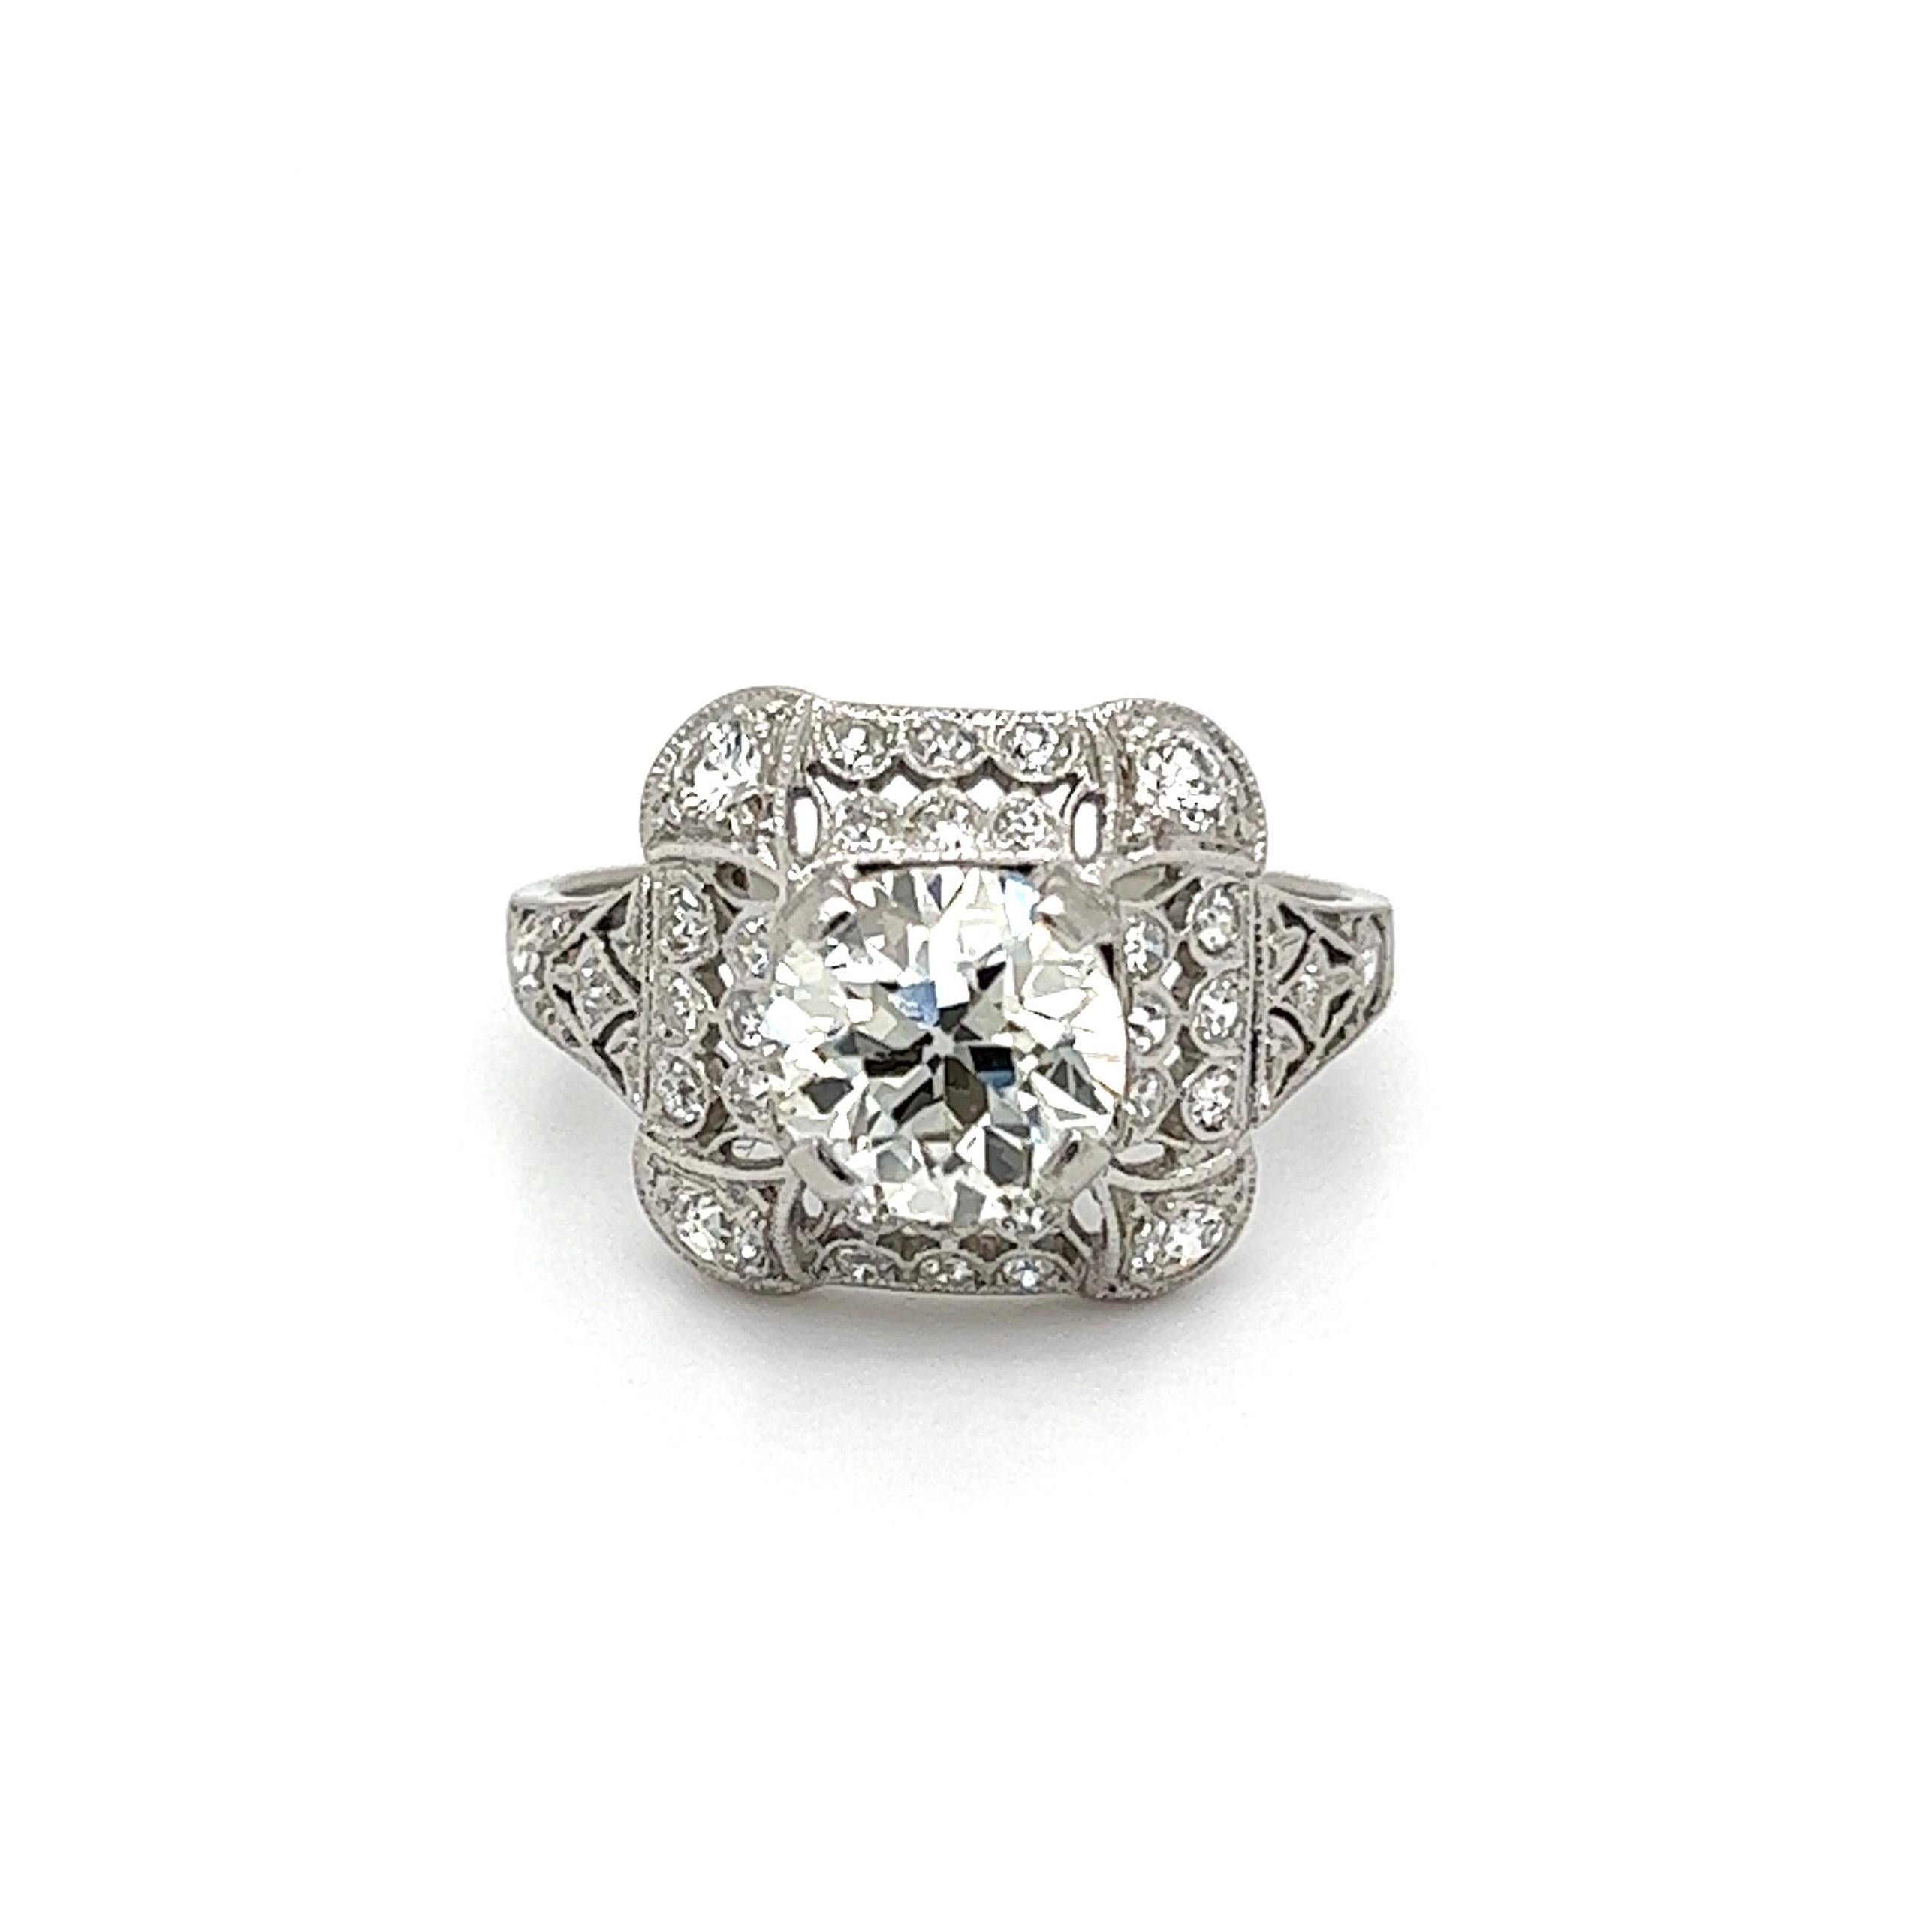 1.31 Carat Diamond Solitaire Art Deco Platinum Ring Estate Fine Jewelry In Excellent Condition For Sale In Montreal, QC